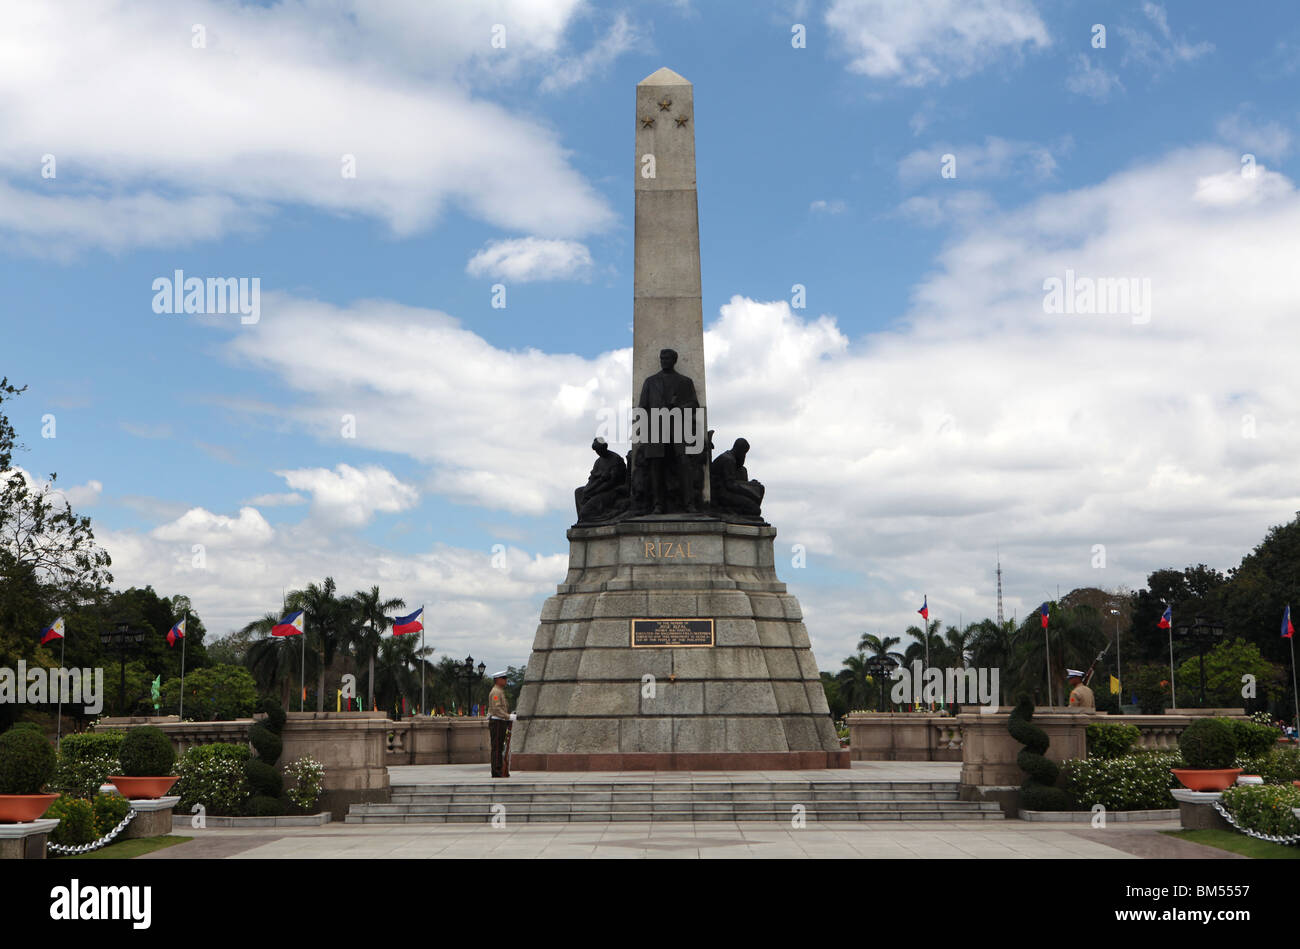 The Rizal Monument, dedicated to national hero Dr Jose Rizal in Rizal Park or Luneta in Manilla in the Philippines. Stock Photo